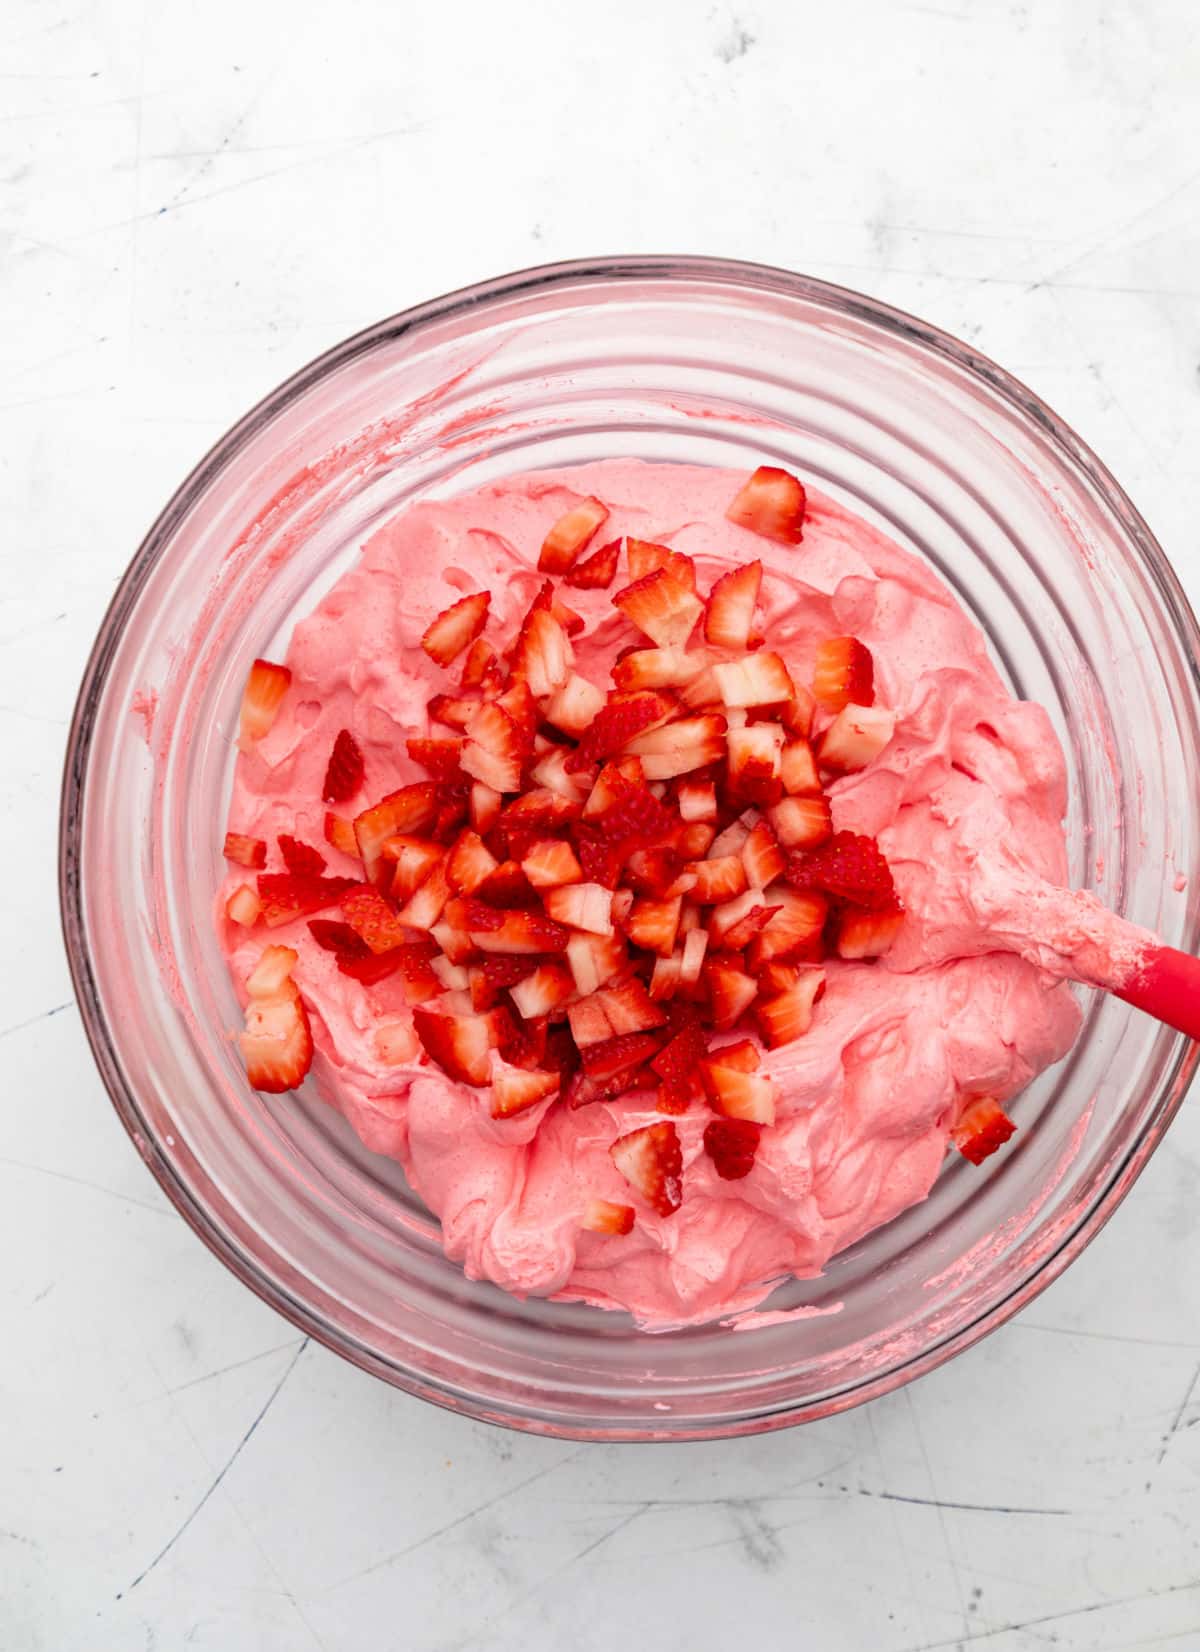 Diced strawberries on top of strawberry marshmallow mixture. 